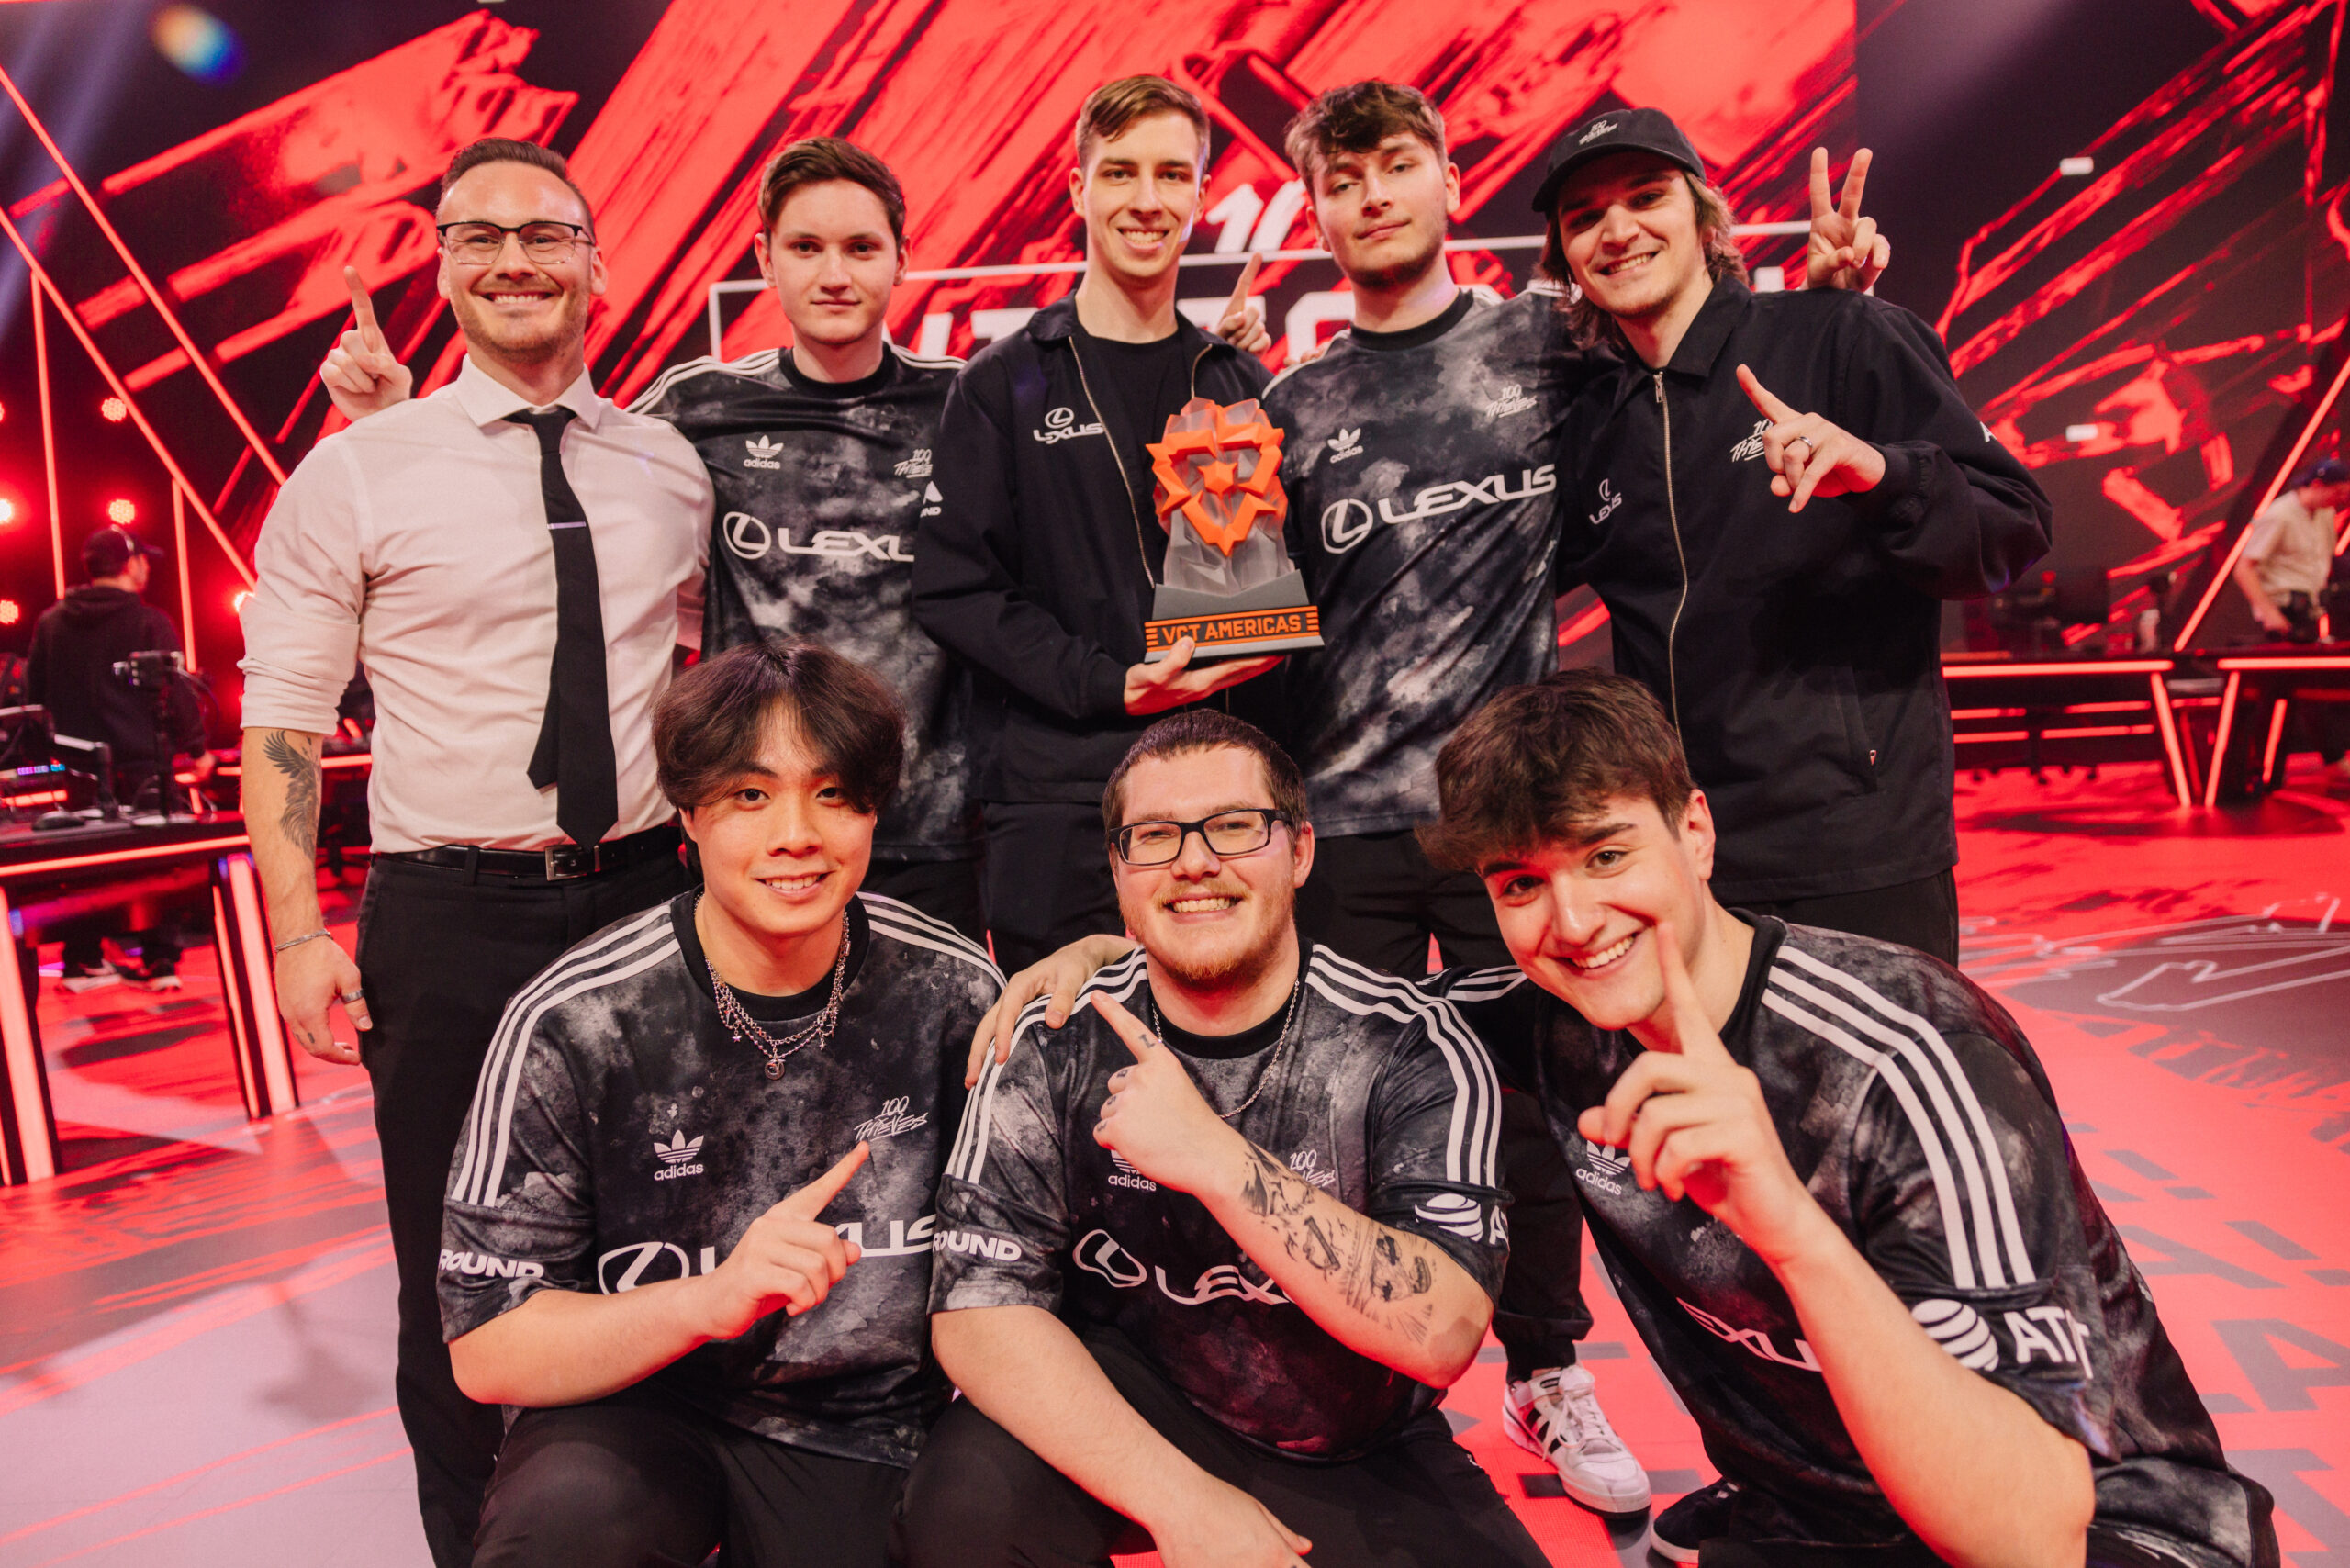 5 Teams You Should Watch Out For in Masters Shanghai